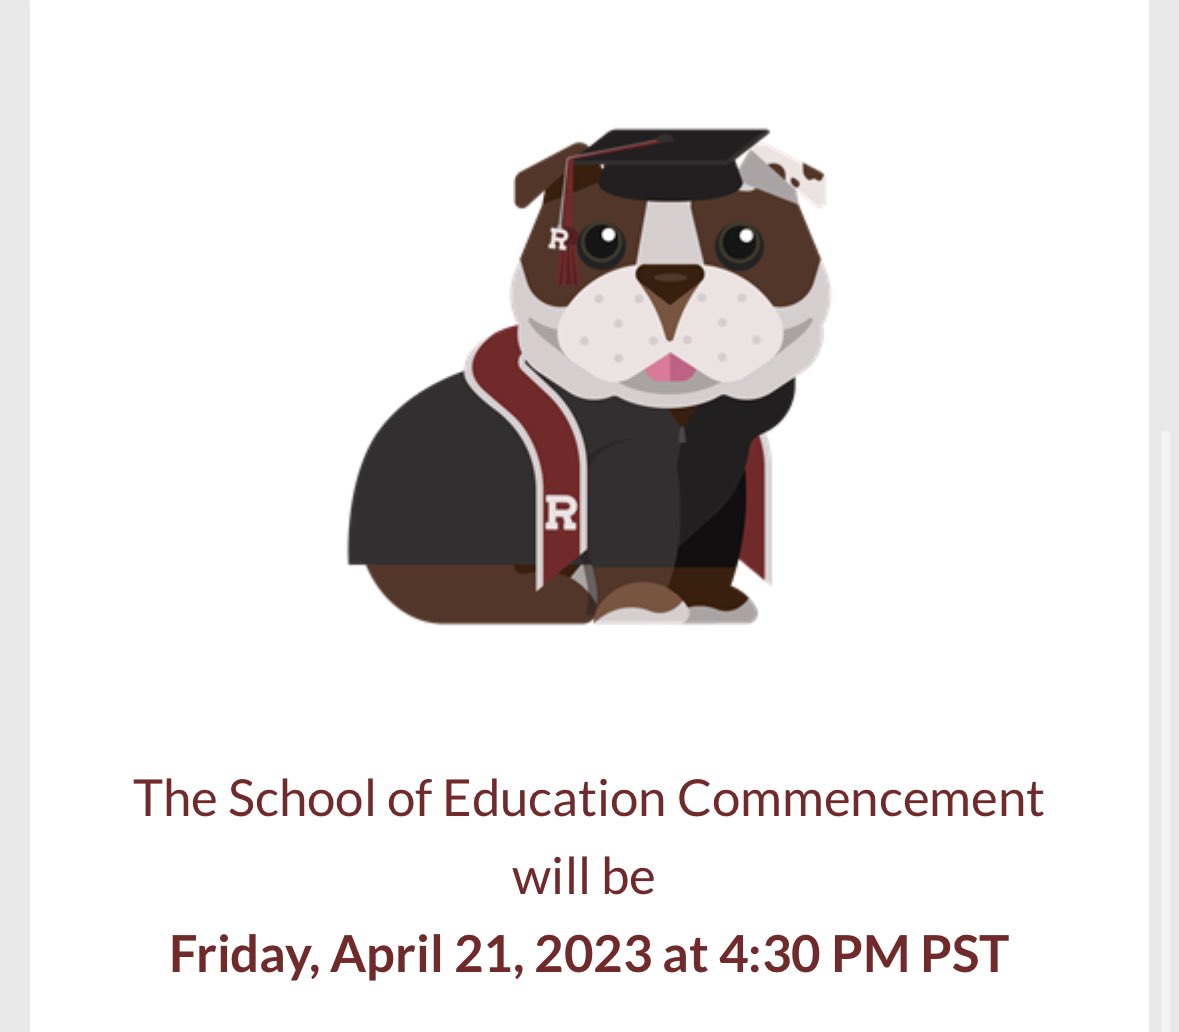 Save the date!! 👩🏼‍🎓 I can’t believe this is right around the corner! #graduation2023 #universityofredlands #schoolofeducation